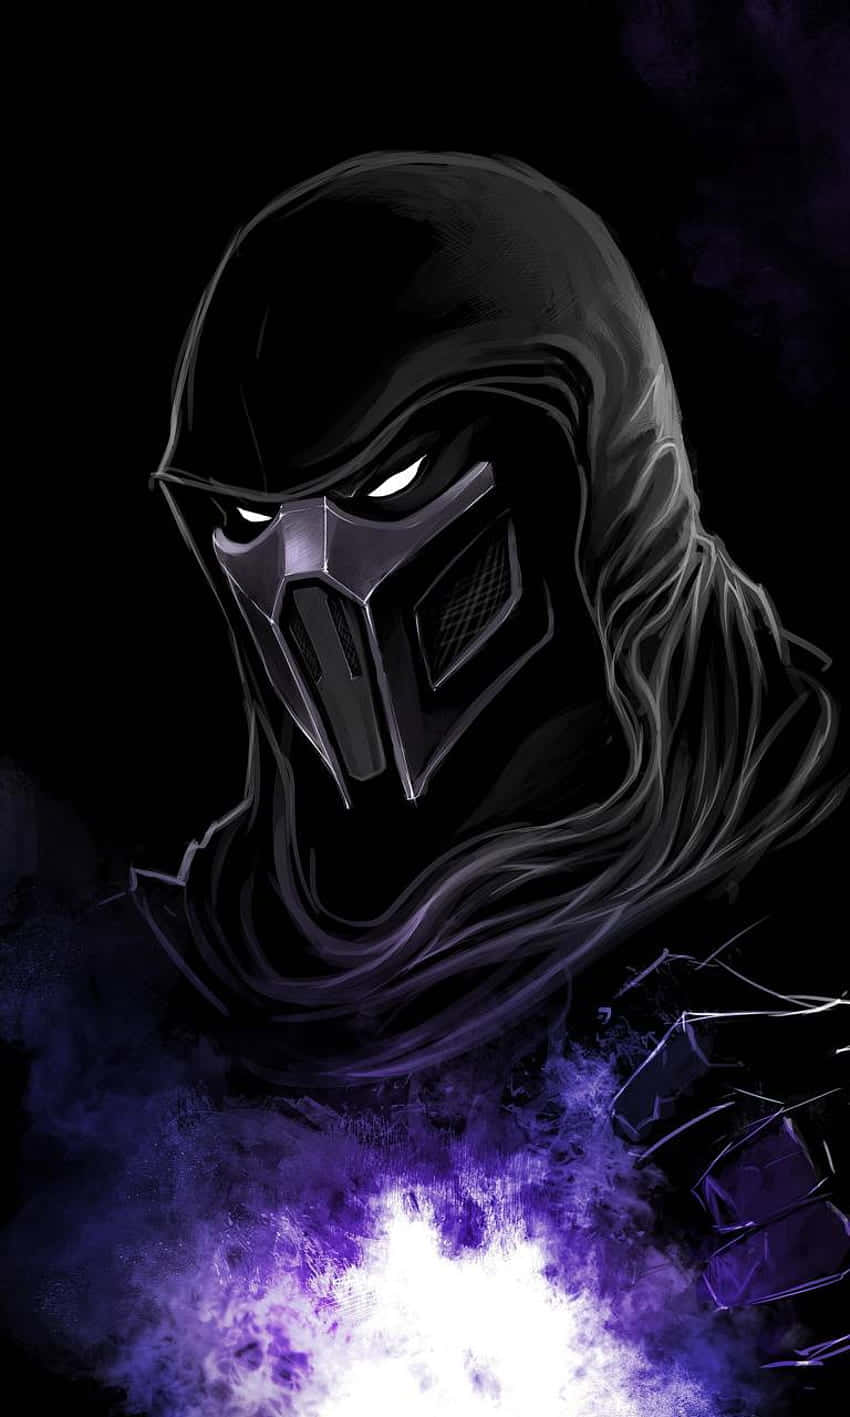 Embrace your shadowy side with Noob Saibot Wallpaper